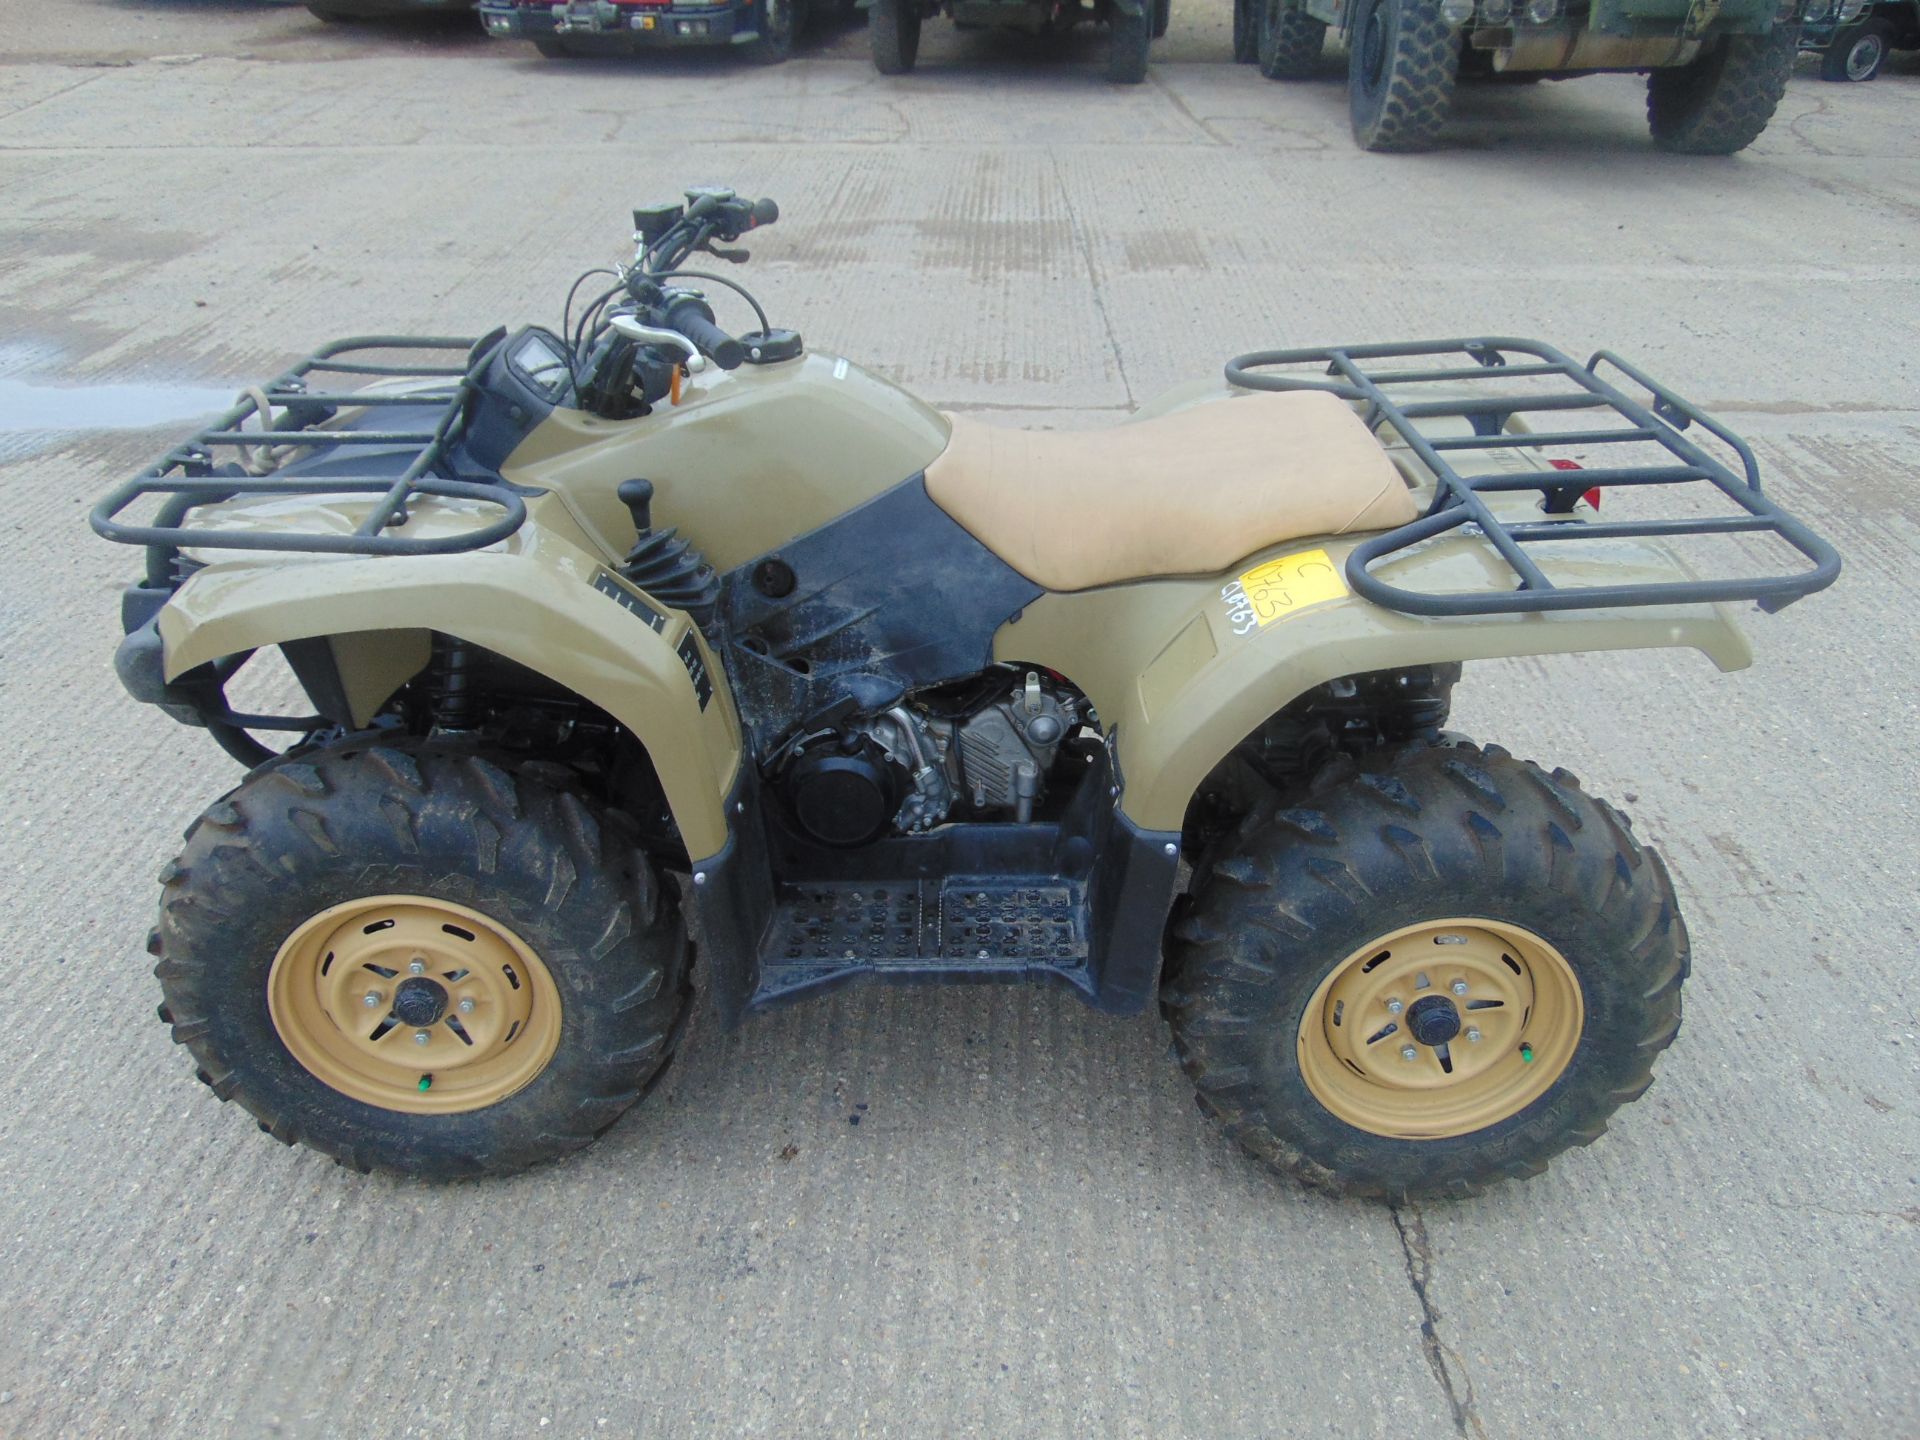 Military Specification Yamaha Grizzly 450 4 x 4 ATV Quad Bike - Image 4 of 19